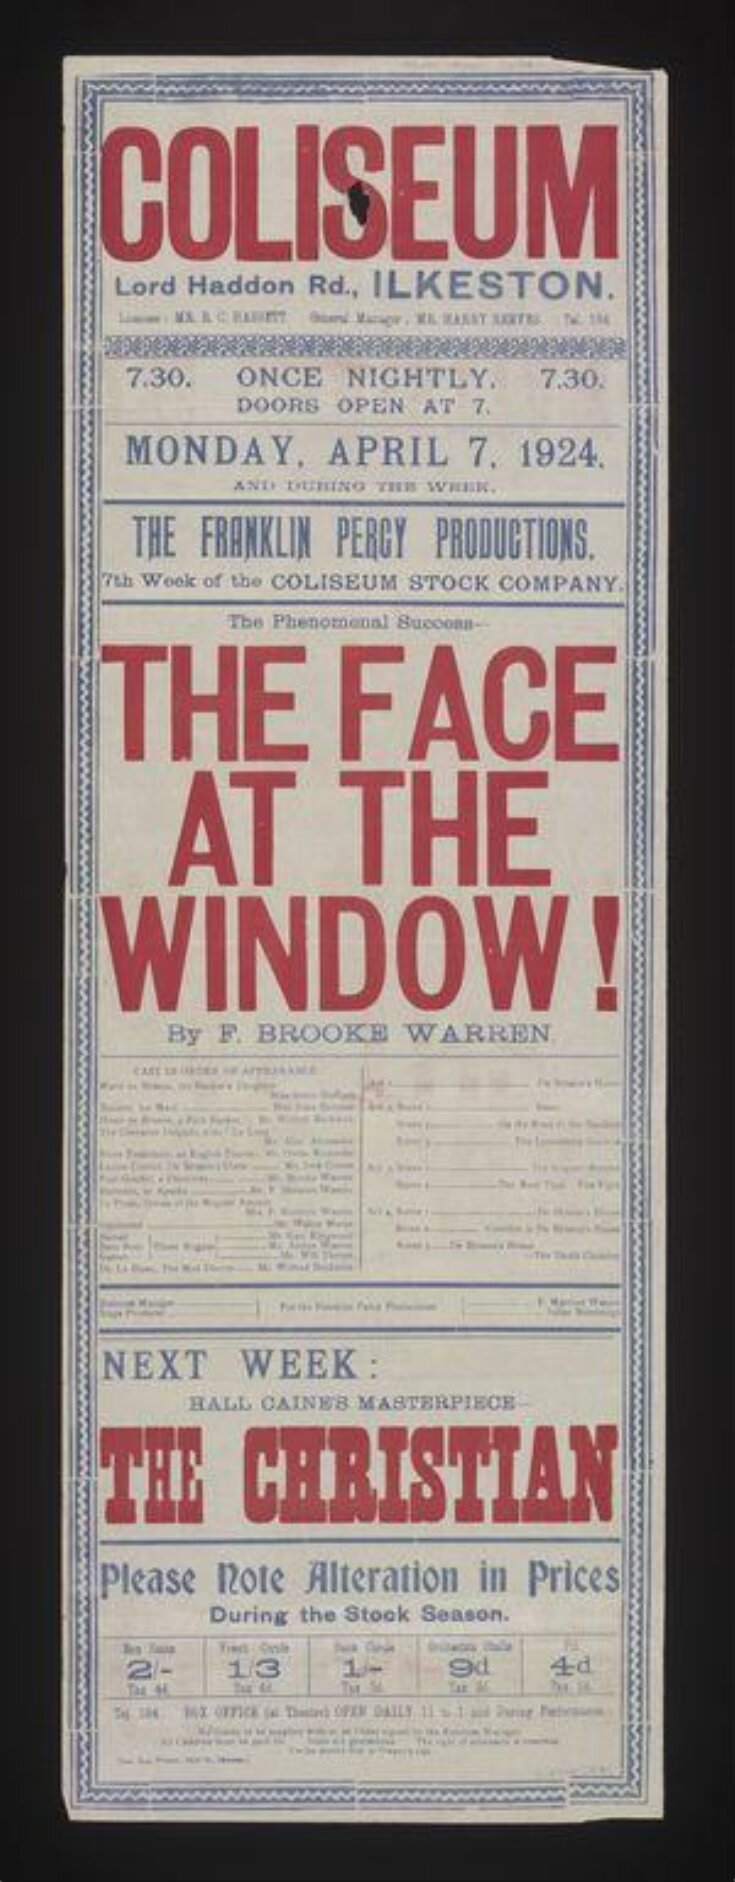 The Face at the Window poster image